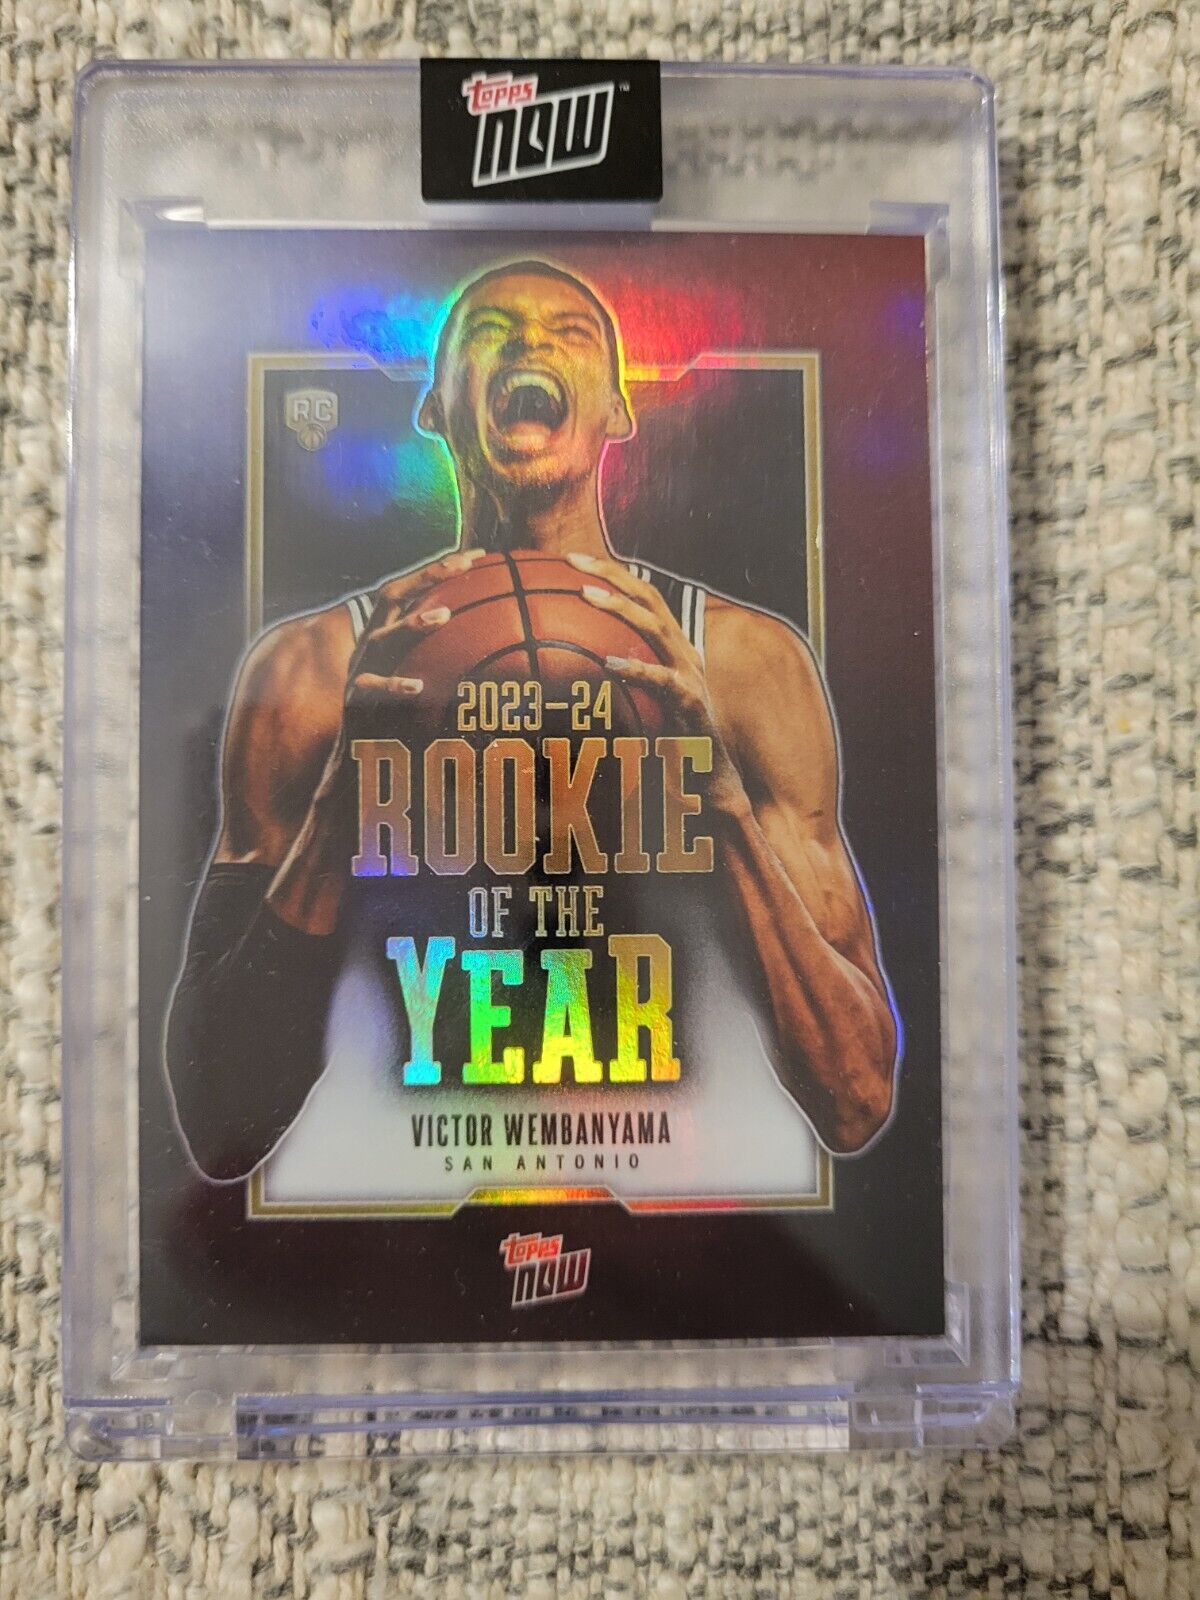 TOPPS NOW VICTOR WEMBANYAMA VW-6 ROOKIE OF THE YEAR LIMITED EDITION RC CARD NEW